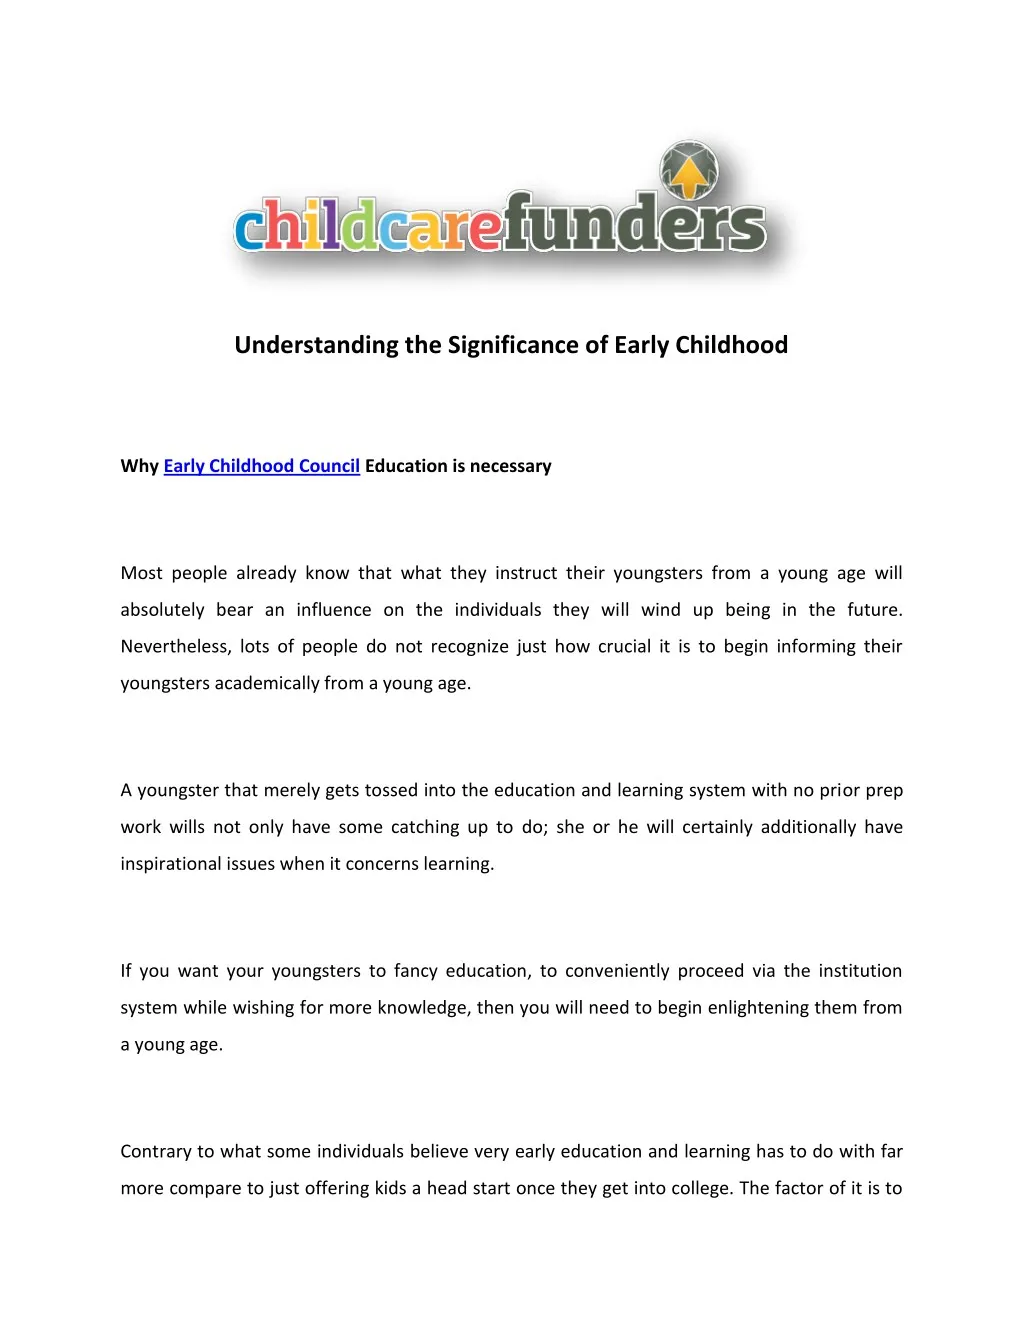 understanding the significance of early childhood